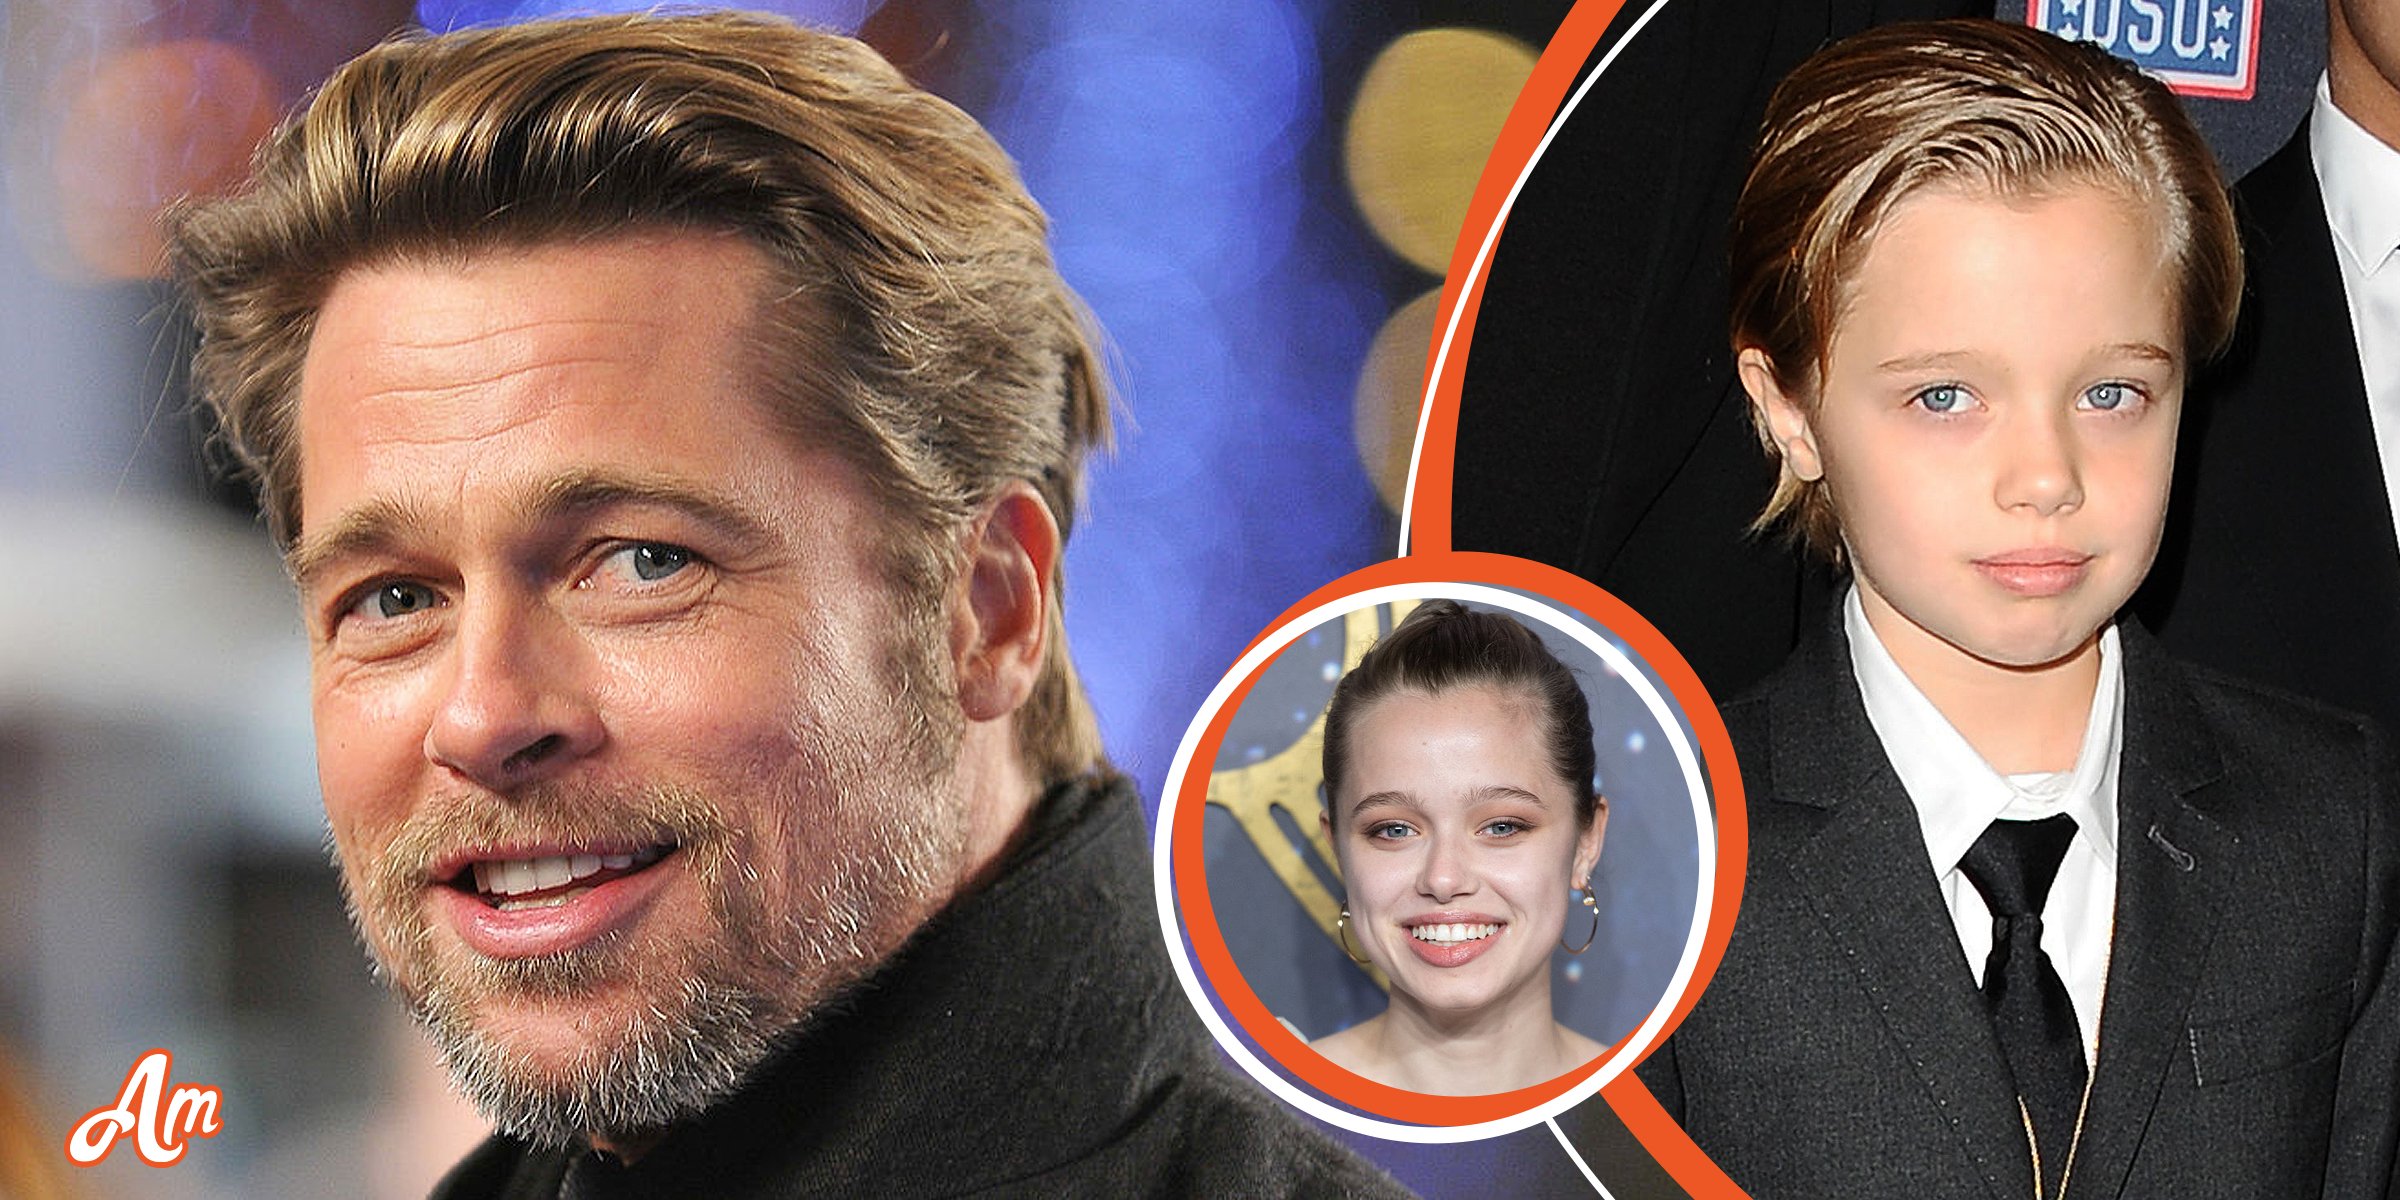 Brad Pitt Says Shiloh’s Viral Video ‘Brings a Tear to the Eye’ Years after She Wanted to Be Called ‘John’